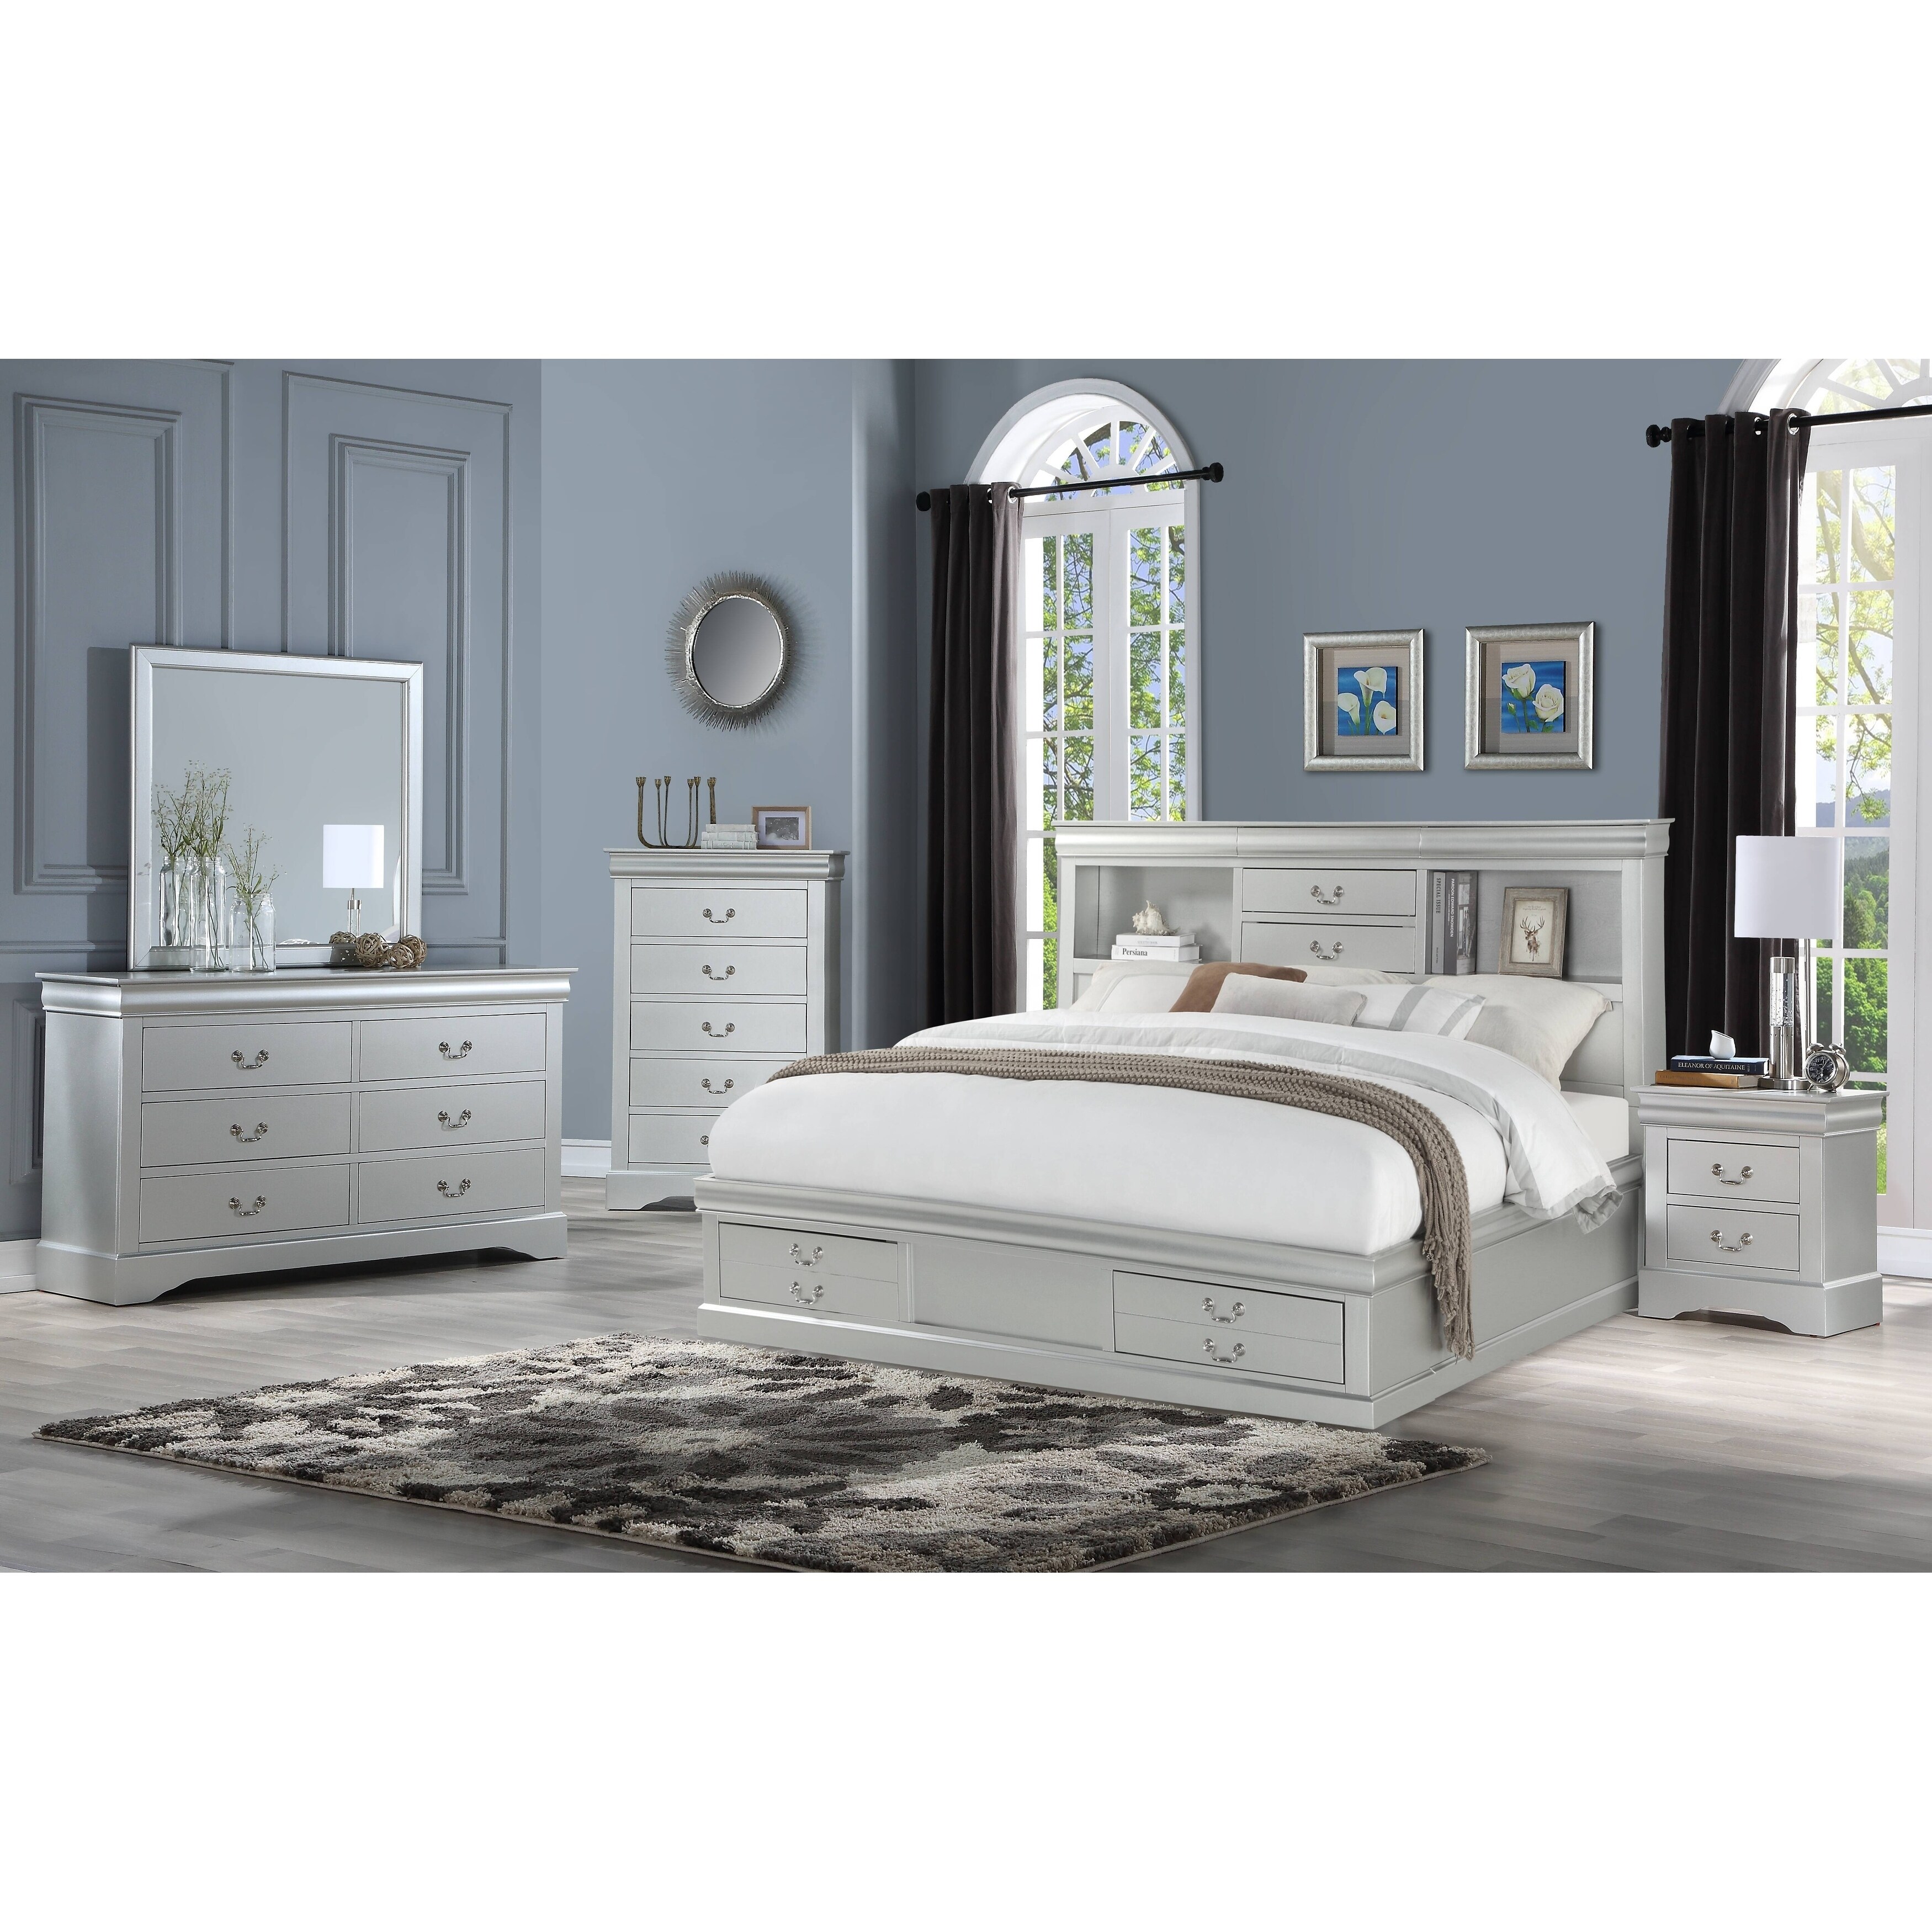 ACME Louis Philippe III Queen Bed with Storage in Platinum